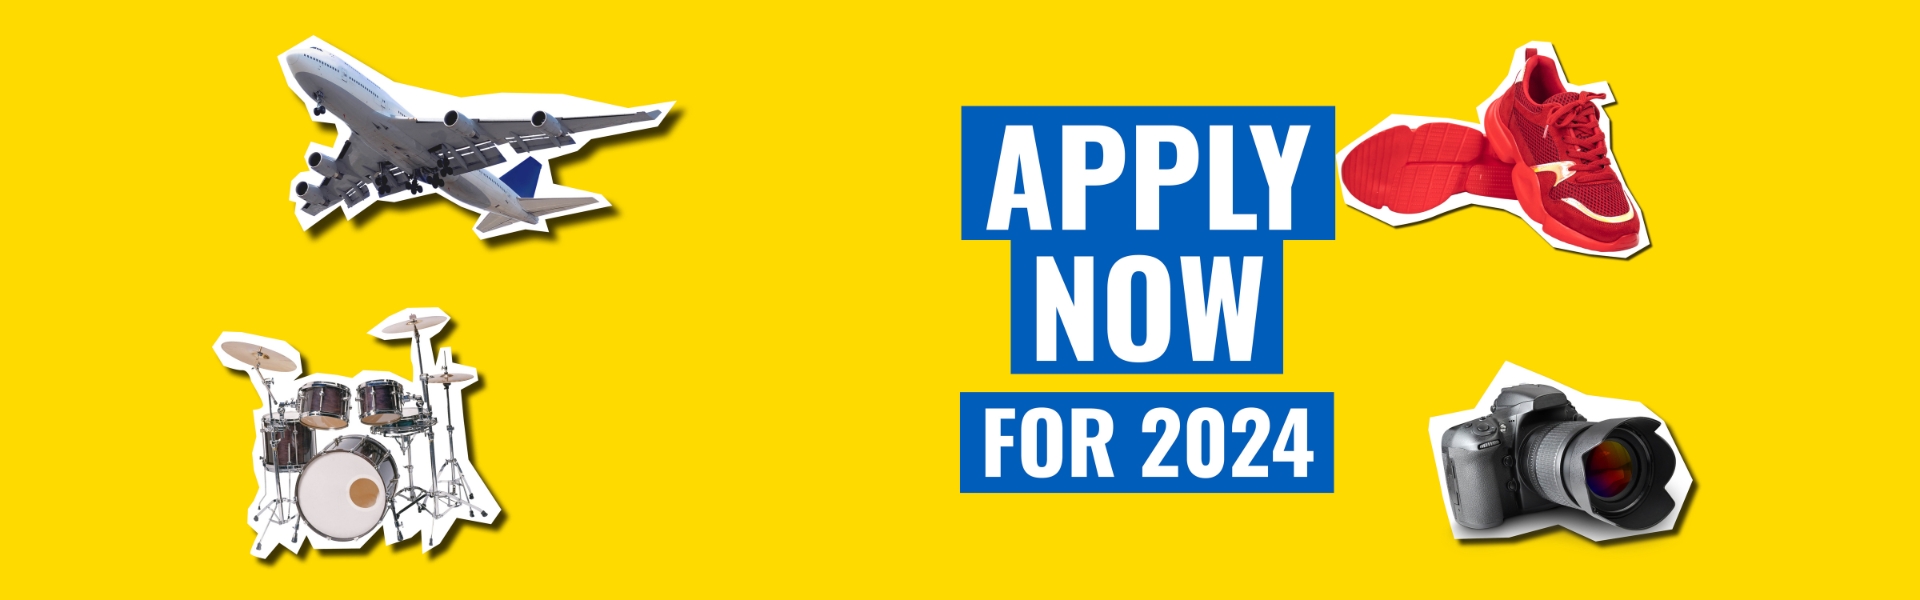 Apply Now for 2024